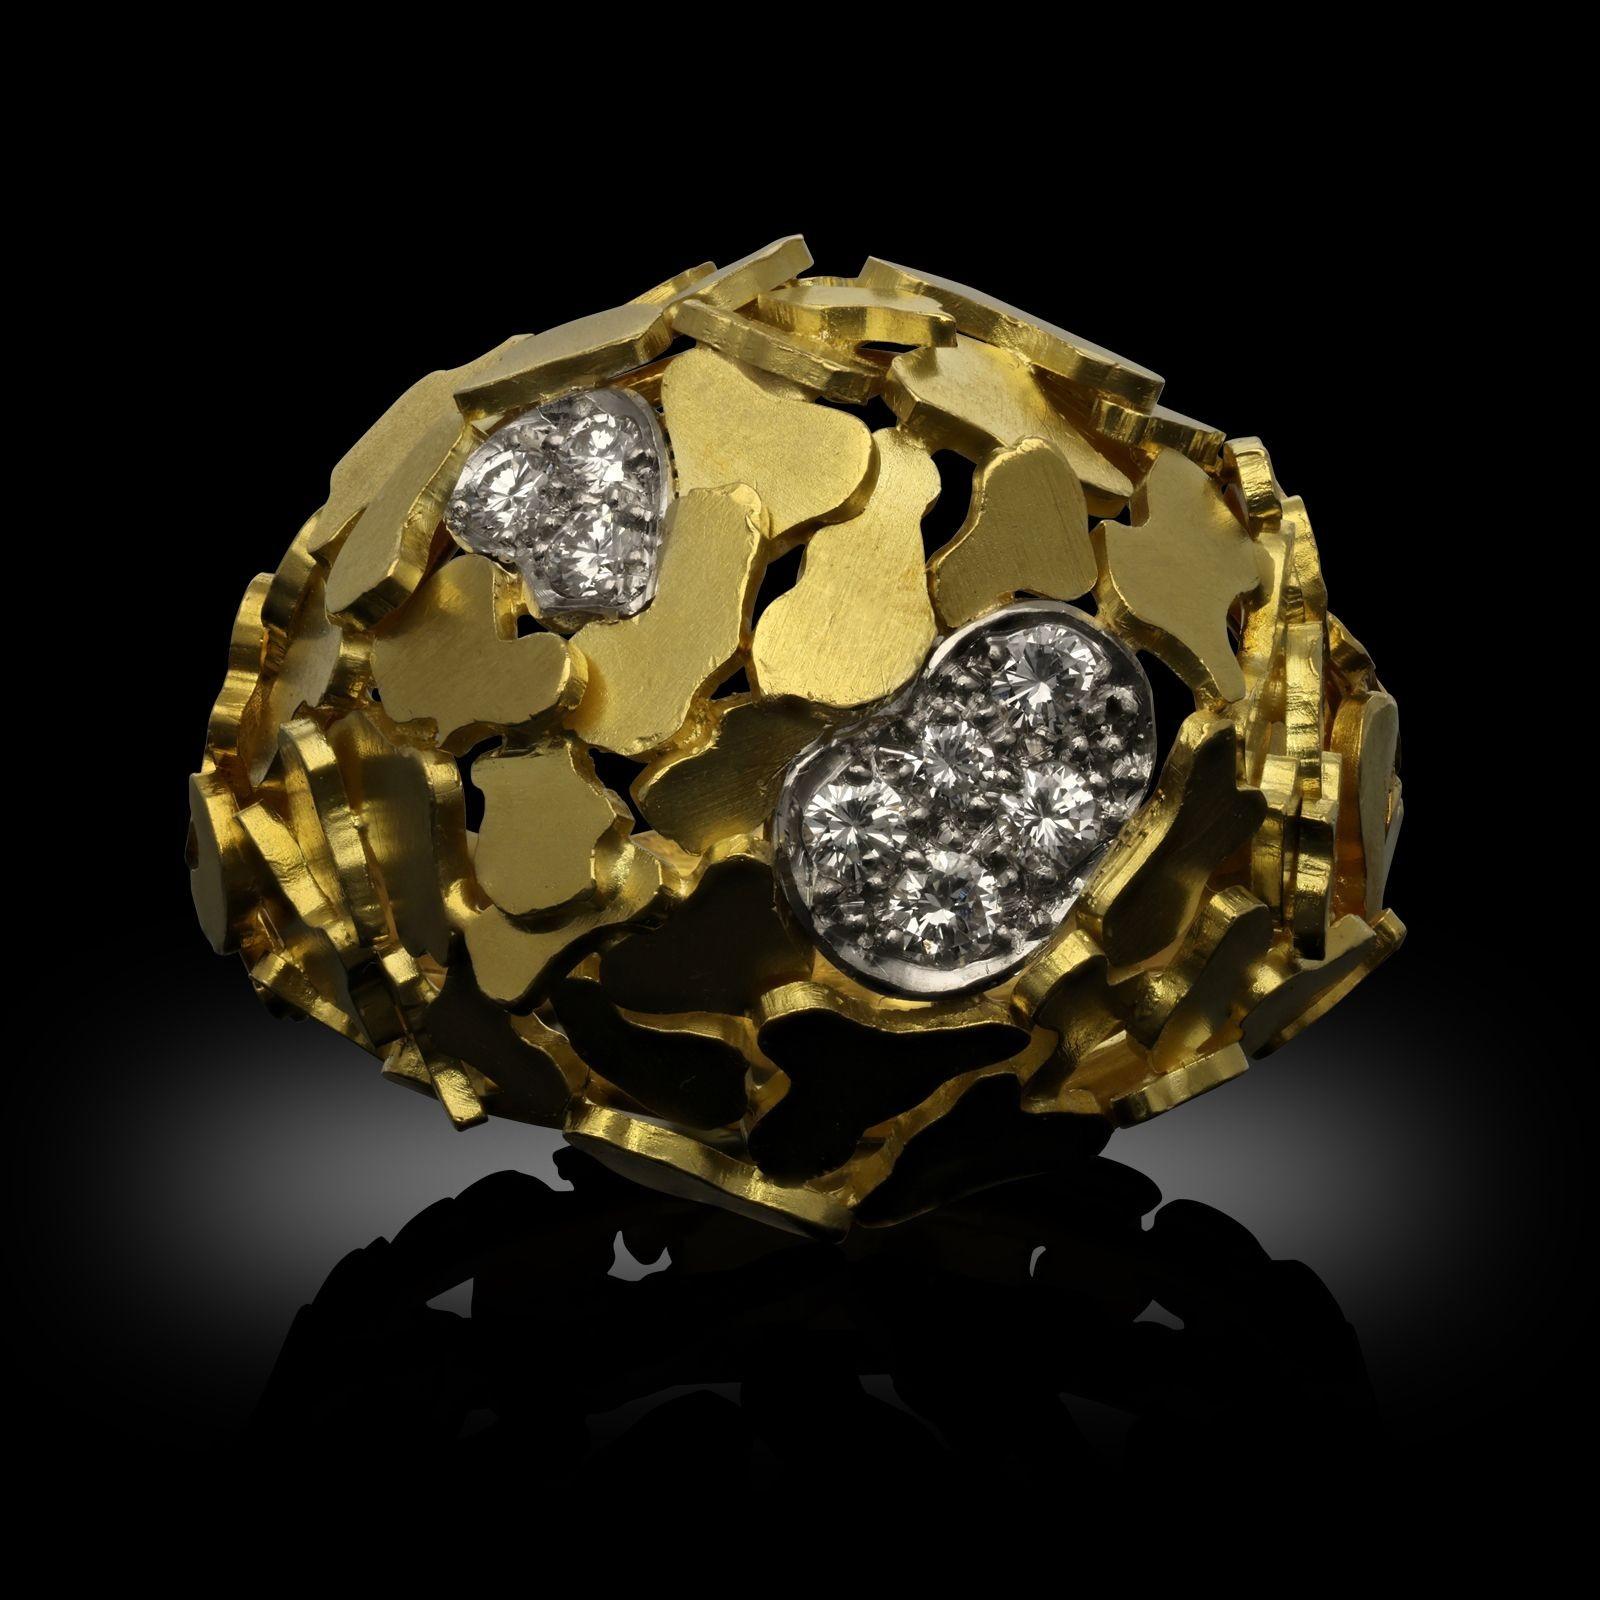 A vintage 18ct yellow gold and diamond ring by Andrew Grima, 1967. The ring is made up of 18ct yellow gold asymmetric flat 'pebbles' which overlap to create the bombe shape, the ring is accented with two diamond panels with grain set round brilliant